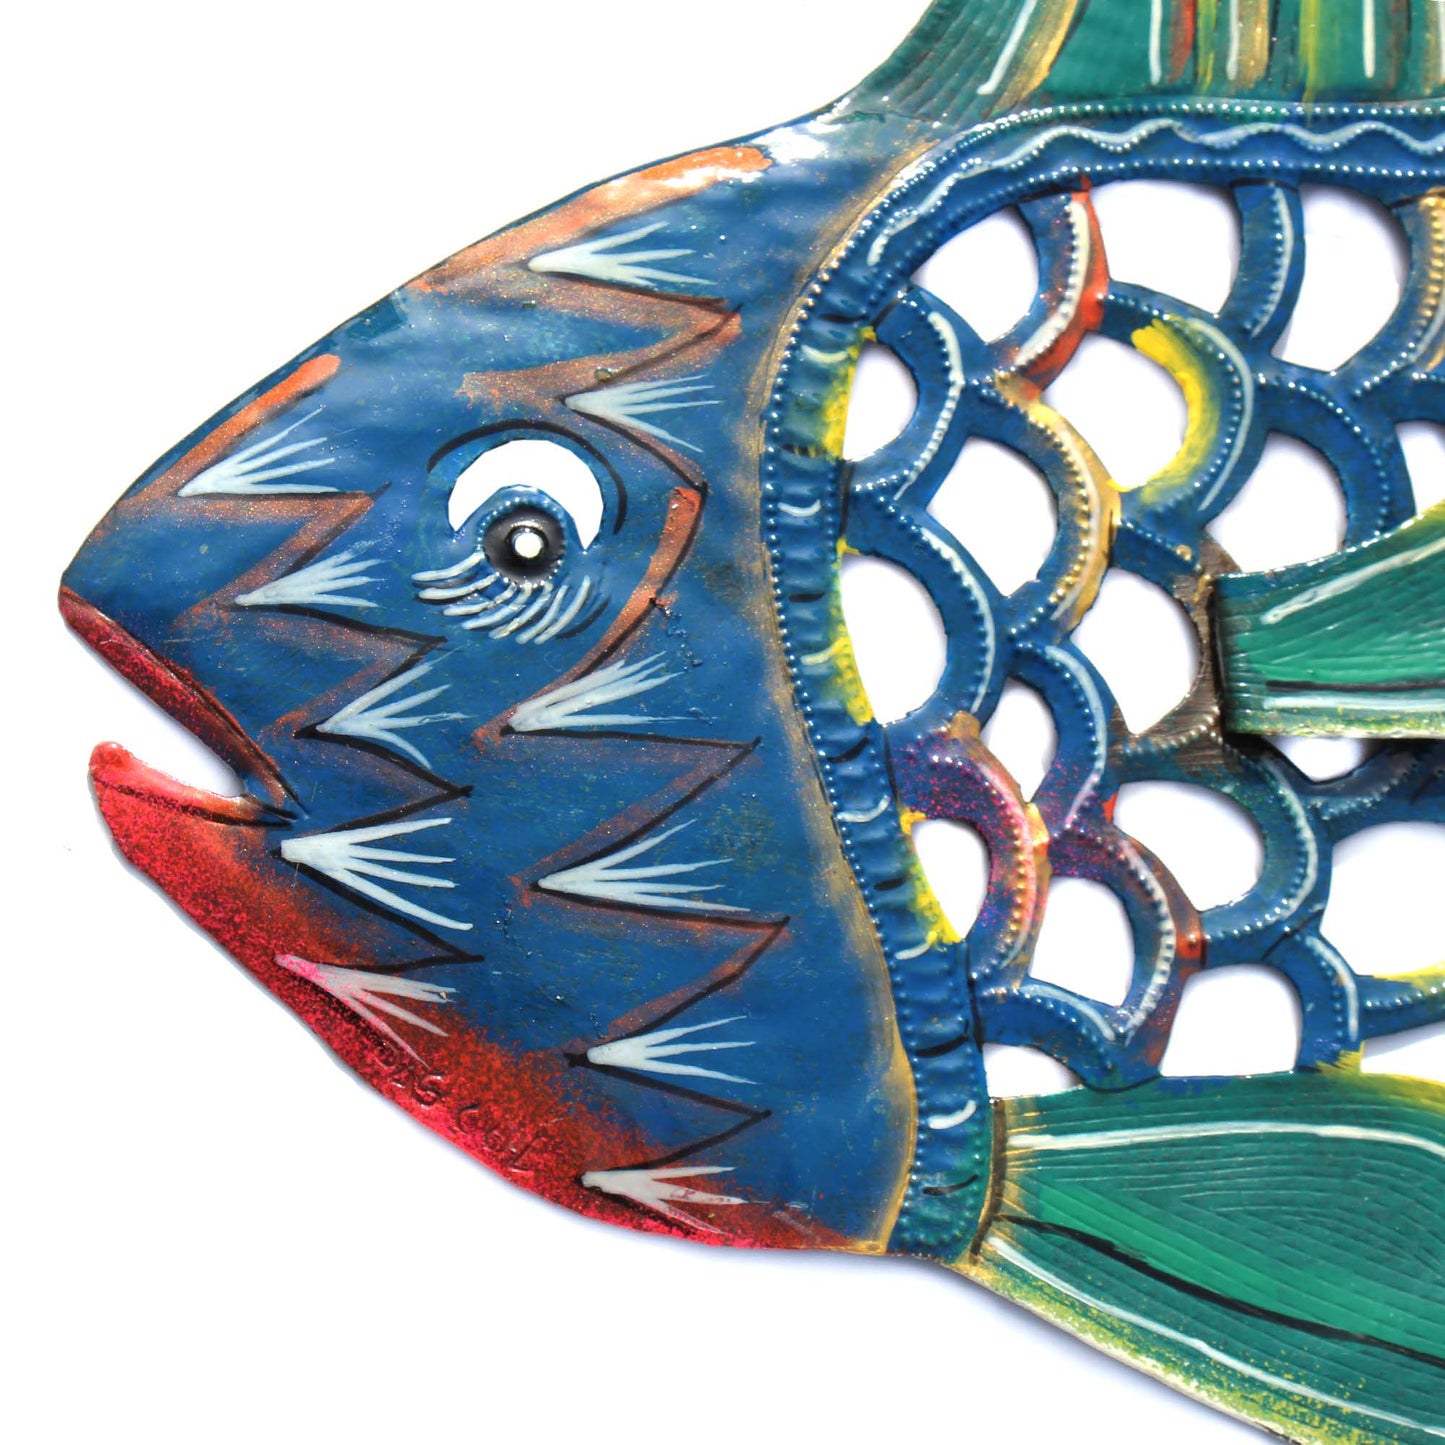 Painted Fish & Shell Steel Drum Wall Art, 24" - by Caribbean Craft